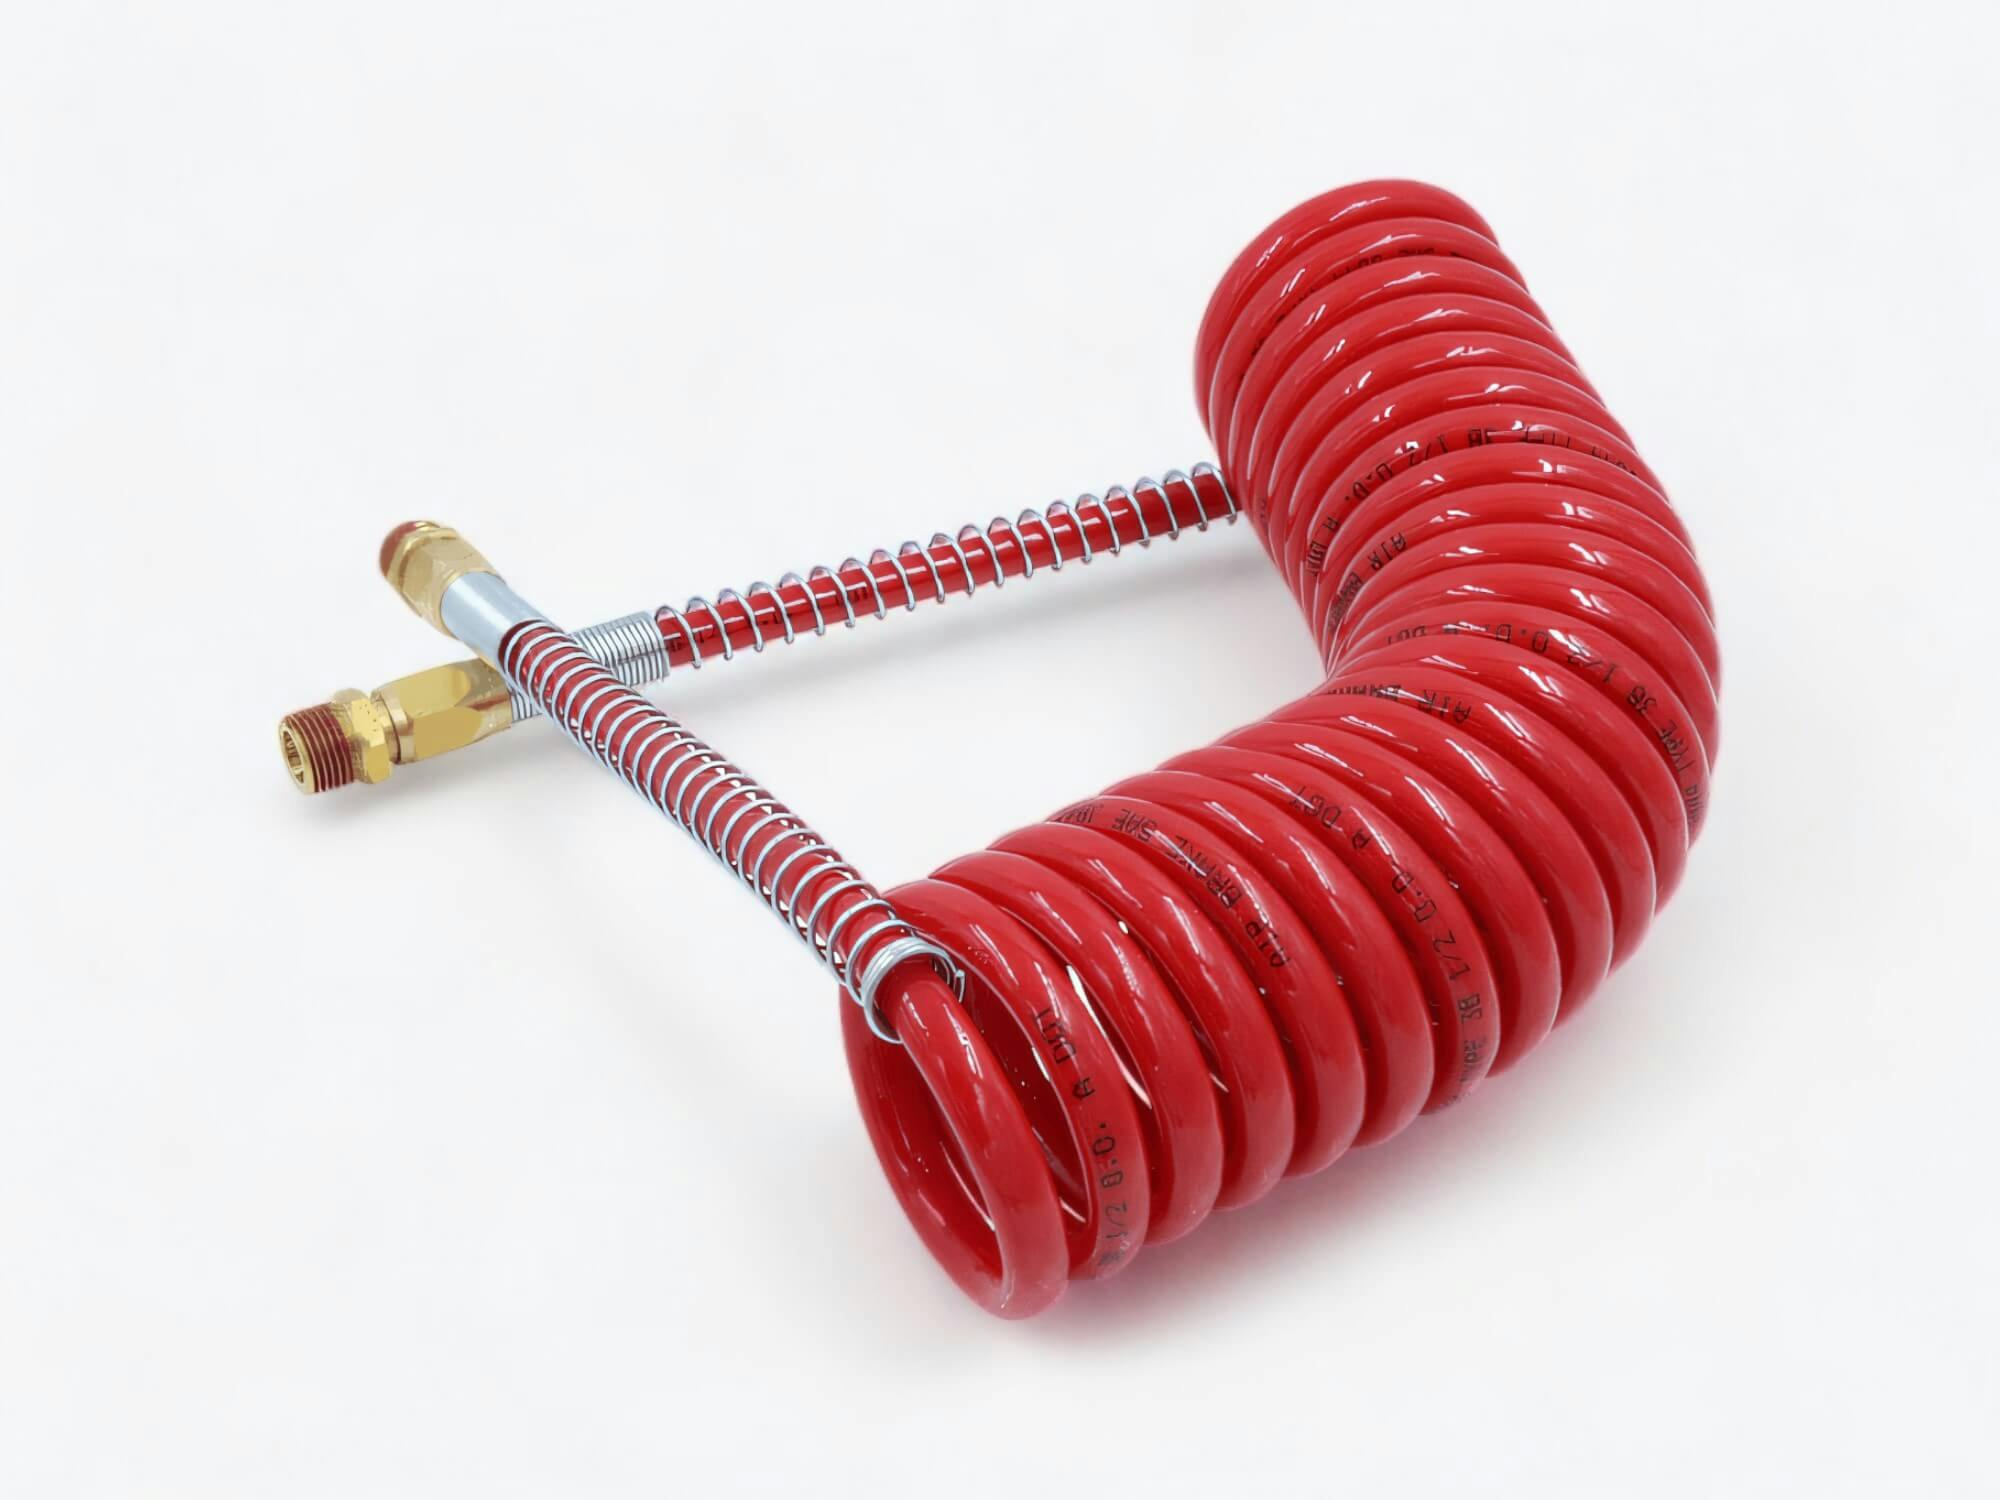 Coiled Air Hose, Red Emergency Only, 15' with 12" Leads - coiled-air-hose-red-emergency-only-15-with-12-leads_01